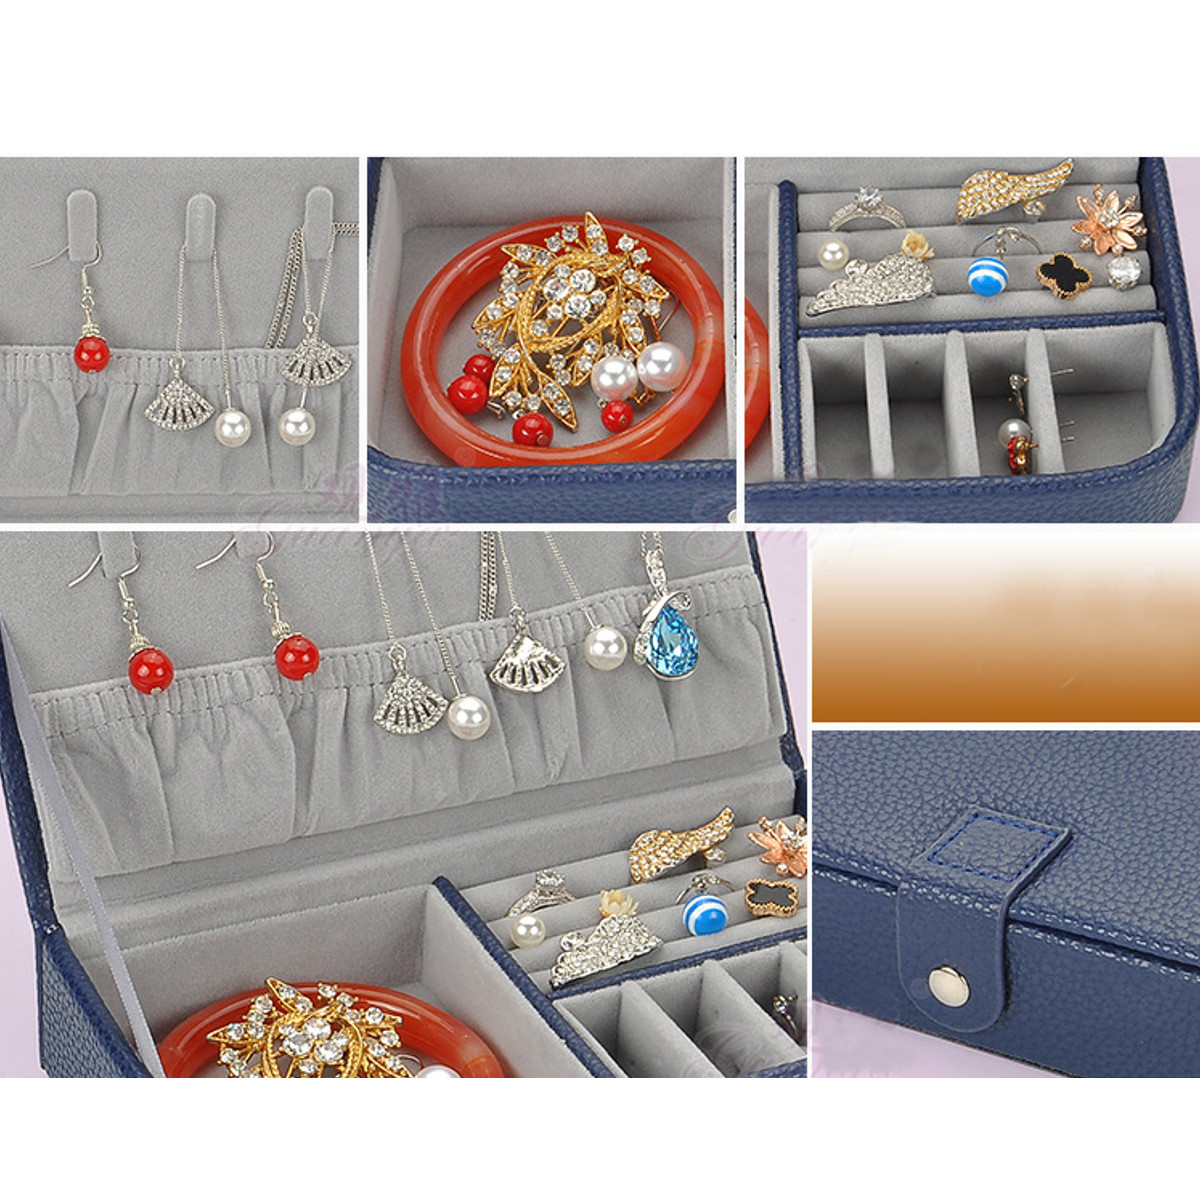 Litchi-Pattern-Jewelry-Box-Leather-Earrings-Storage-Cases-For-Girl-Portable-Monolayer-Jewelry-Organi-1589627-6